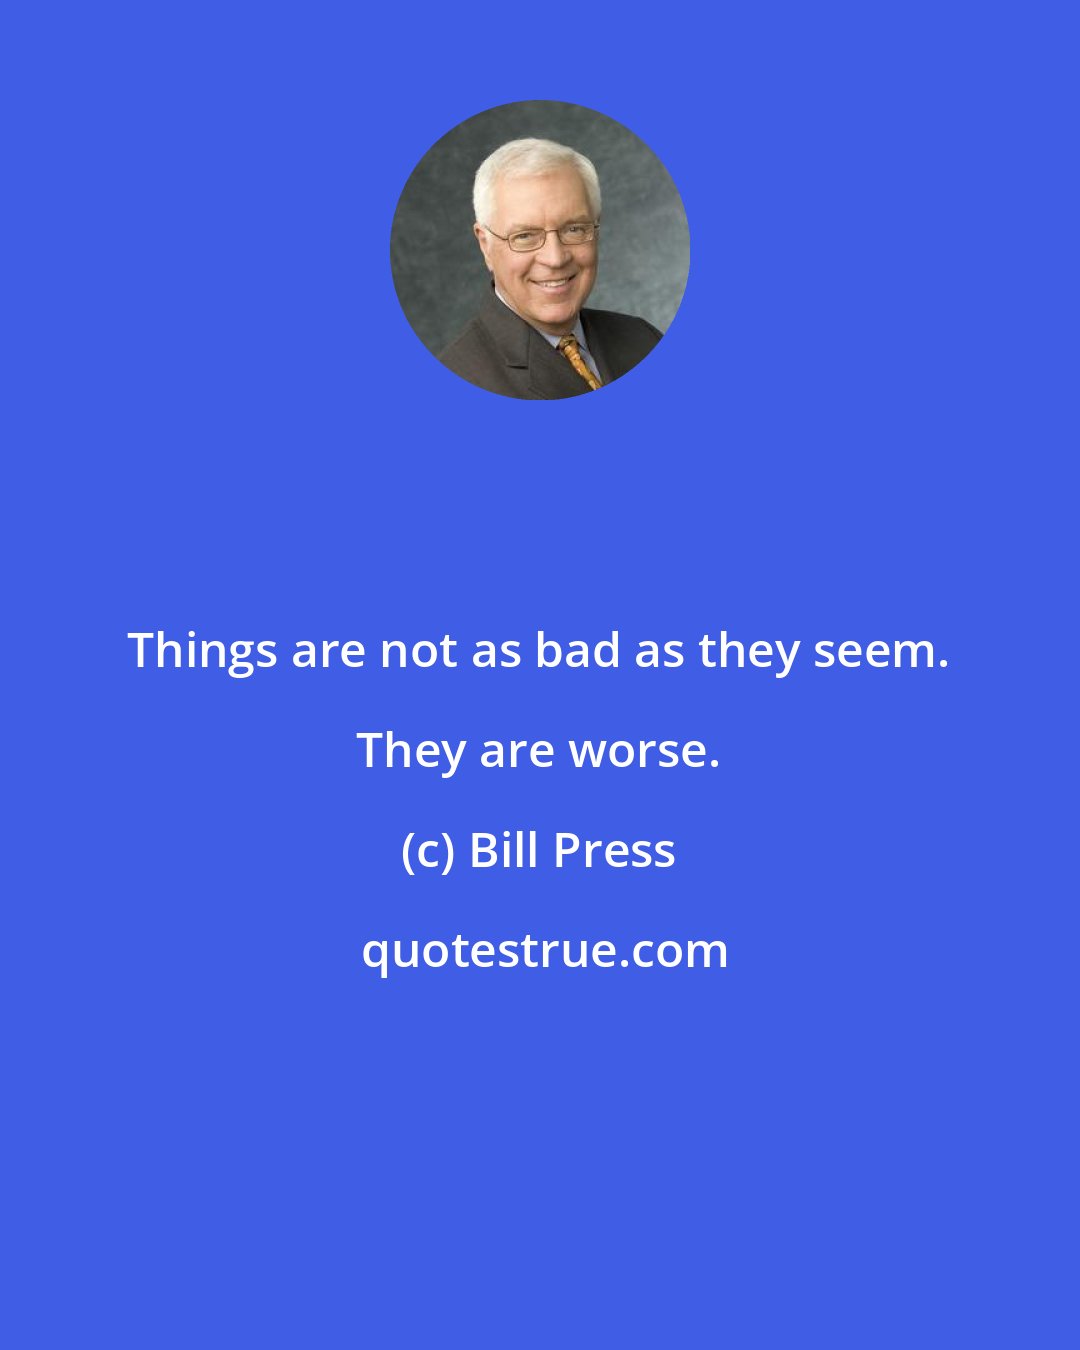 Bill Press: Things are not as bad as they seem. They are worse.